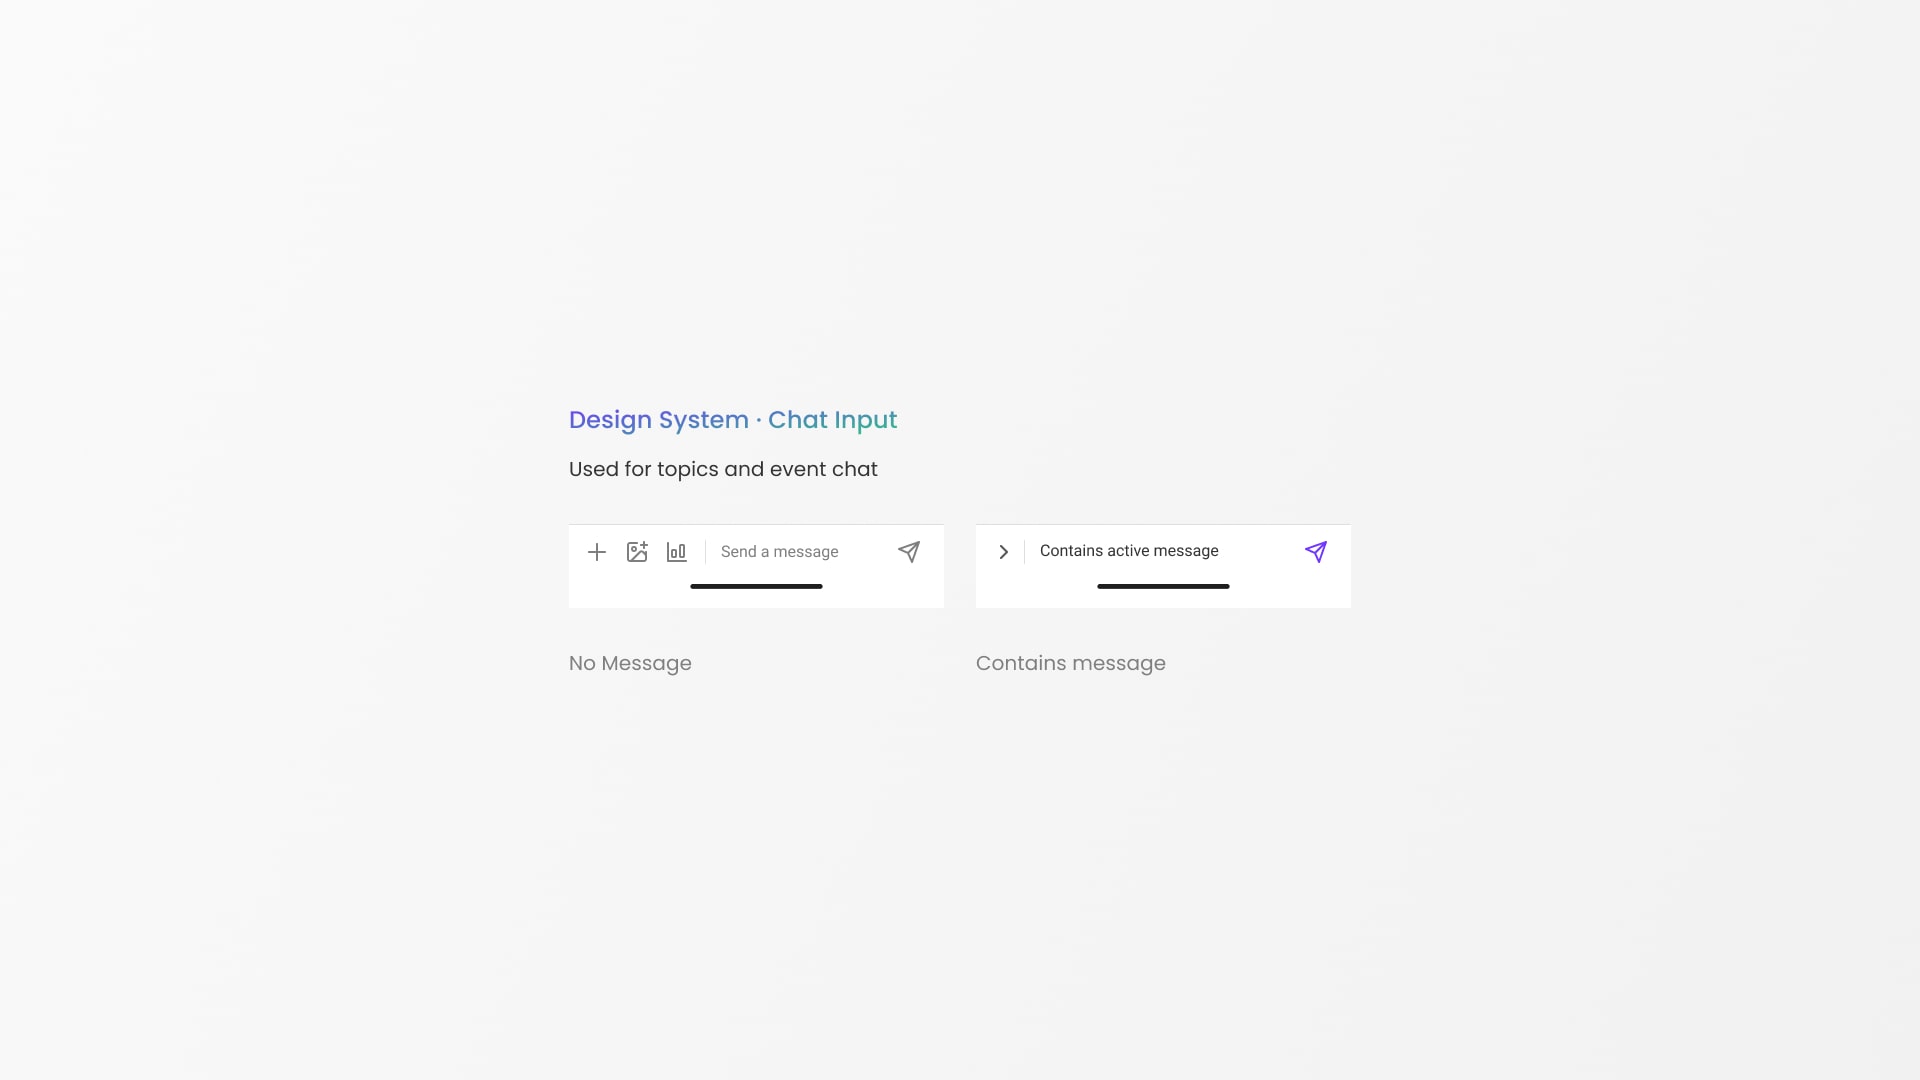 Heylo chat input redesign to work with newly added features such as polls.